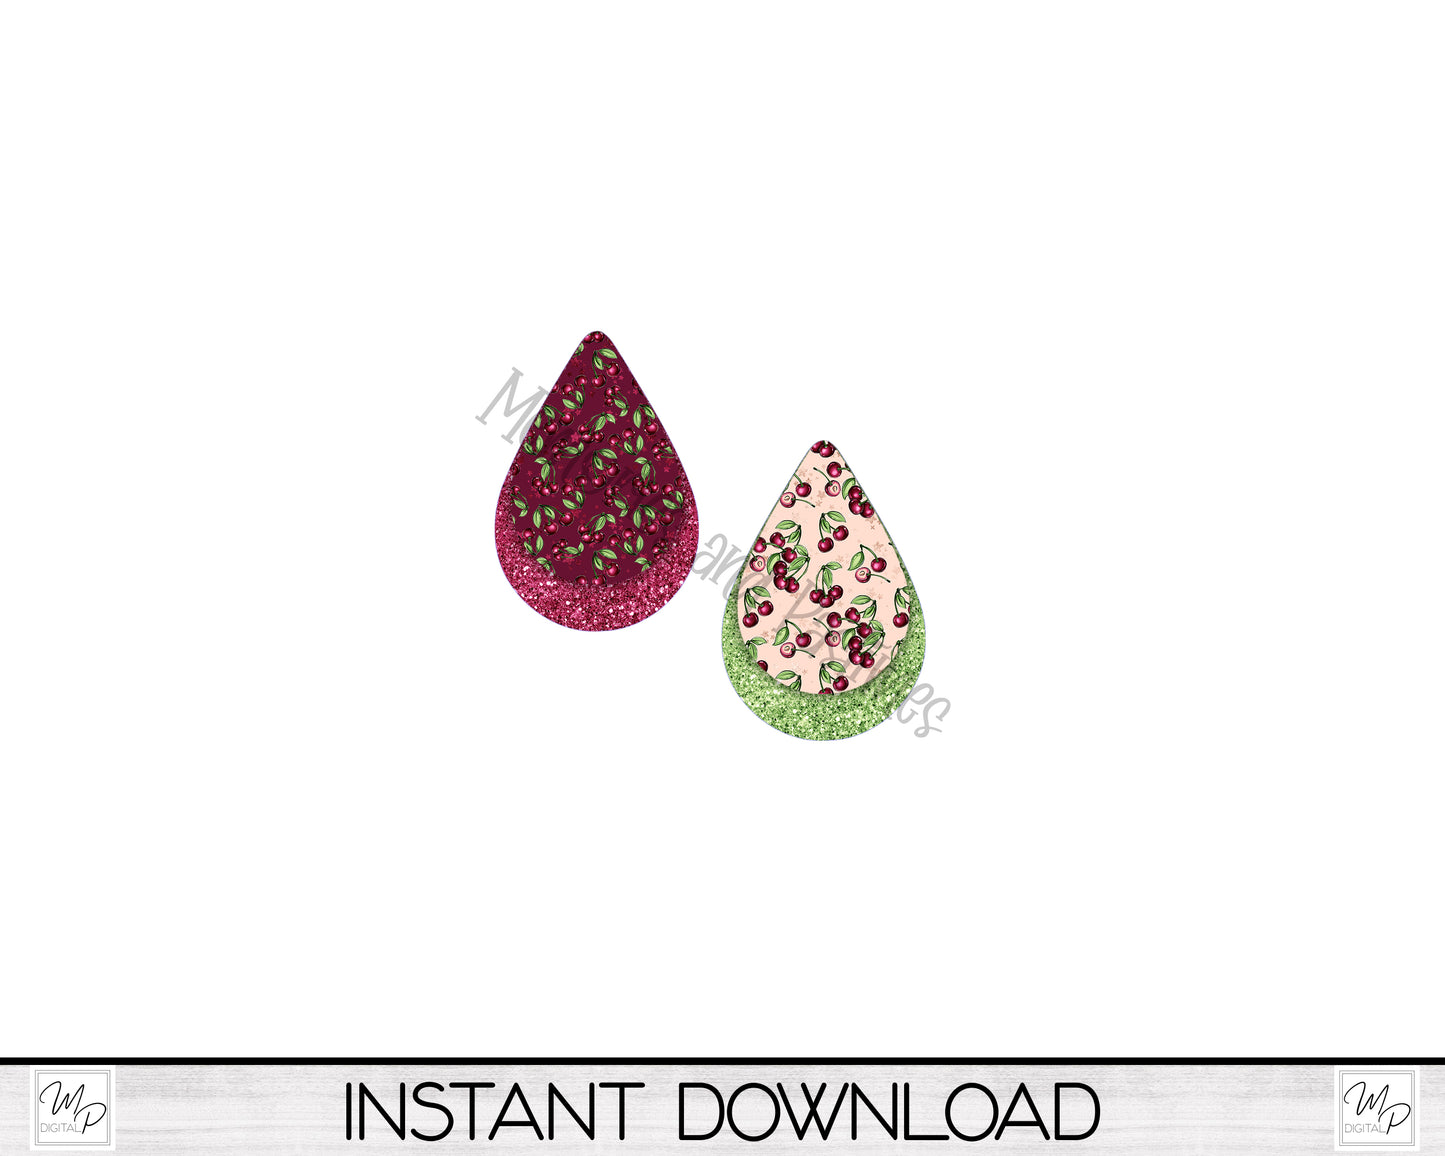 Cherry PNG Design for Sublimation of Teardrop Earrings, Digital Download